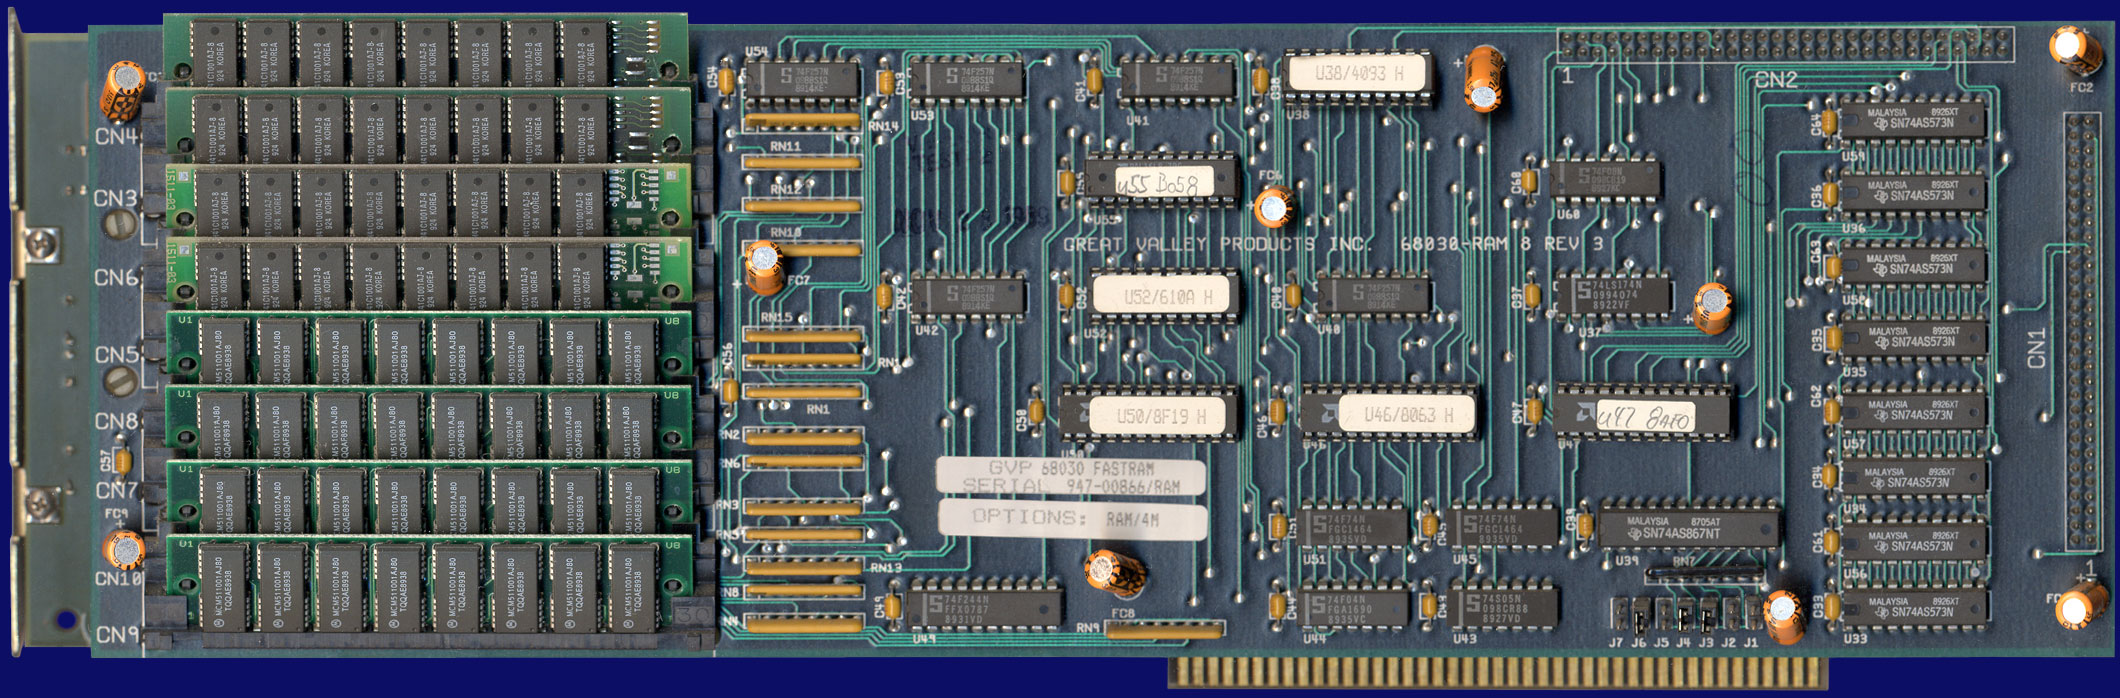 Great Valley Products A3001 (Impact A2000-030) - Series I with RAM8 board, back side